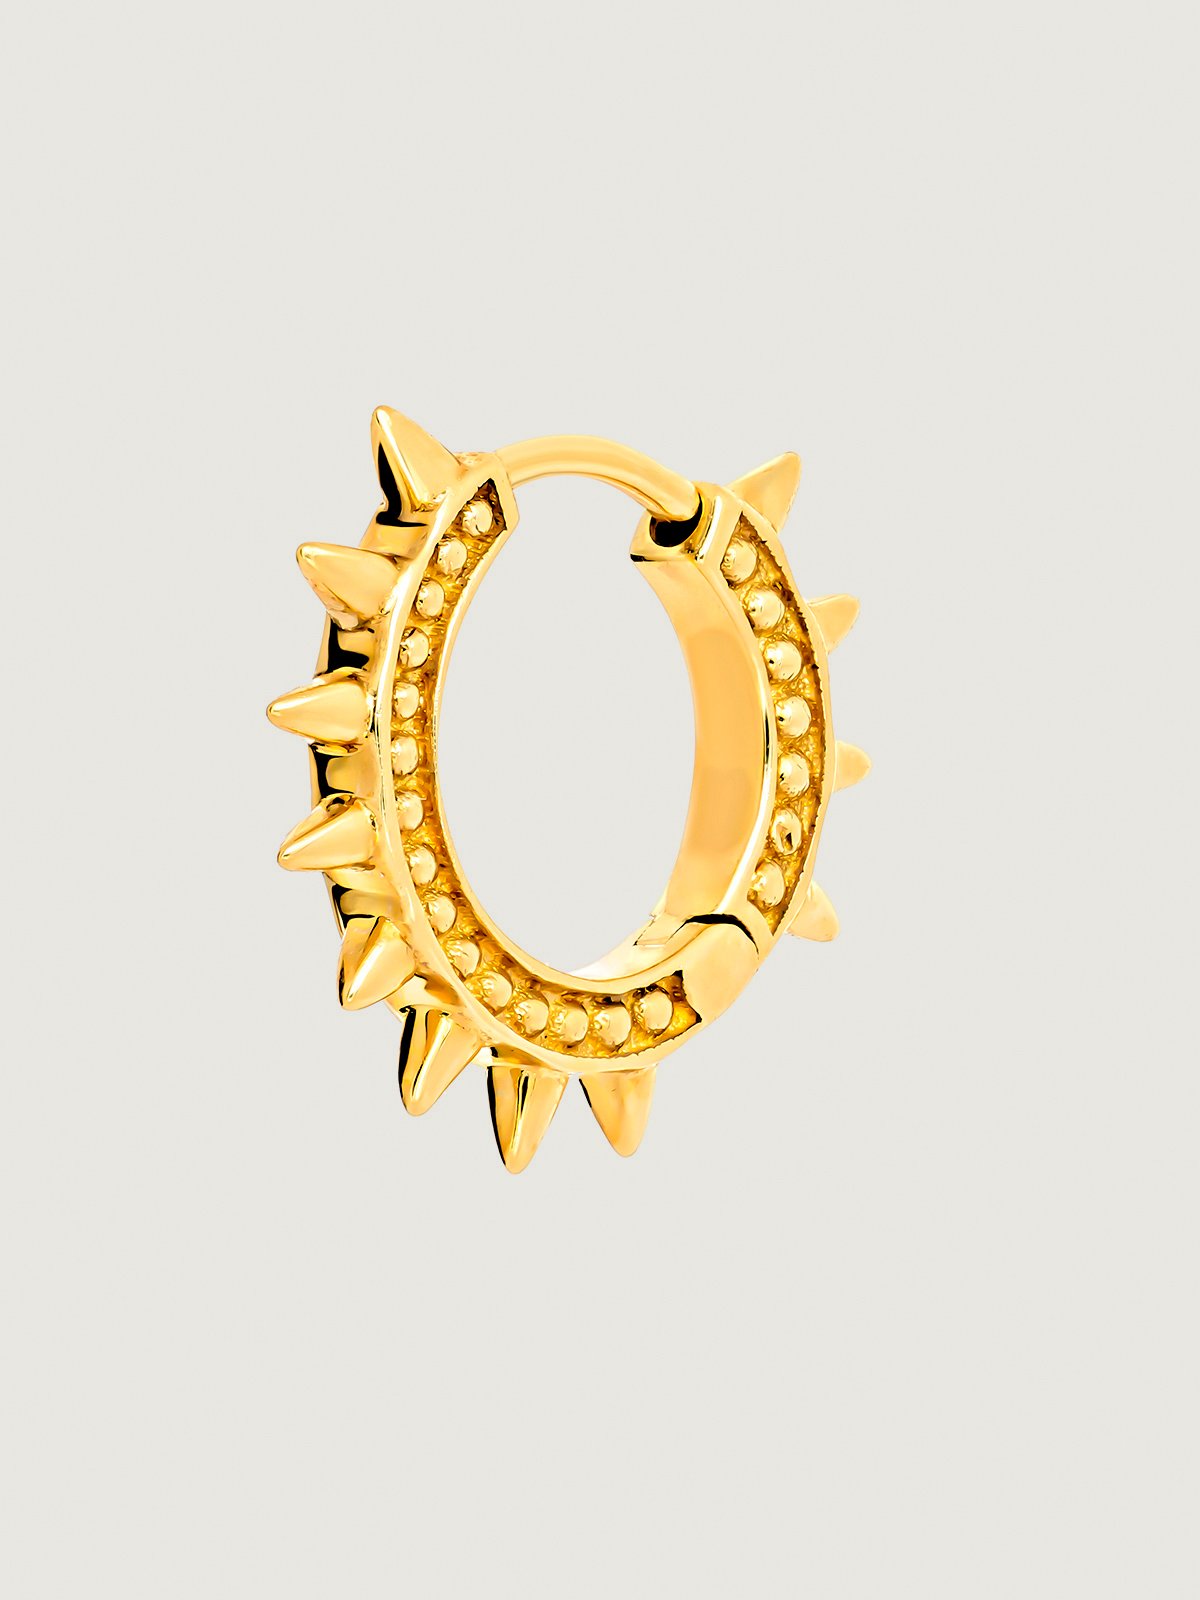 Single 9K yellow gold hoop earring with spikes and spheres